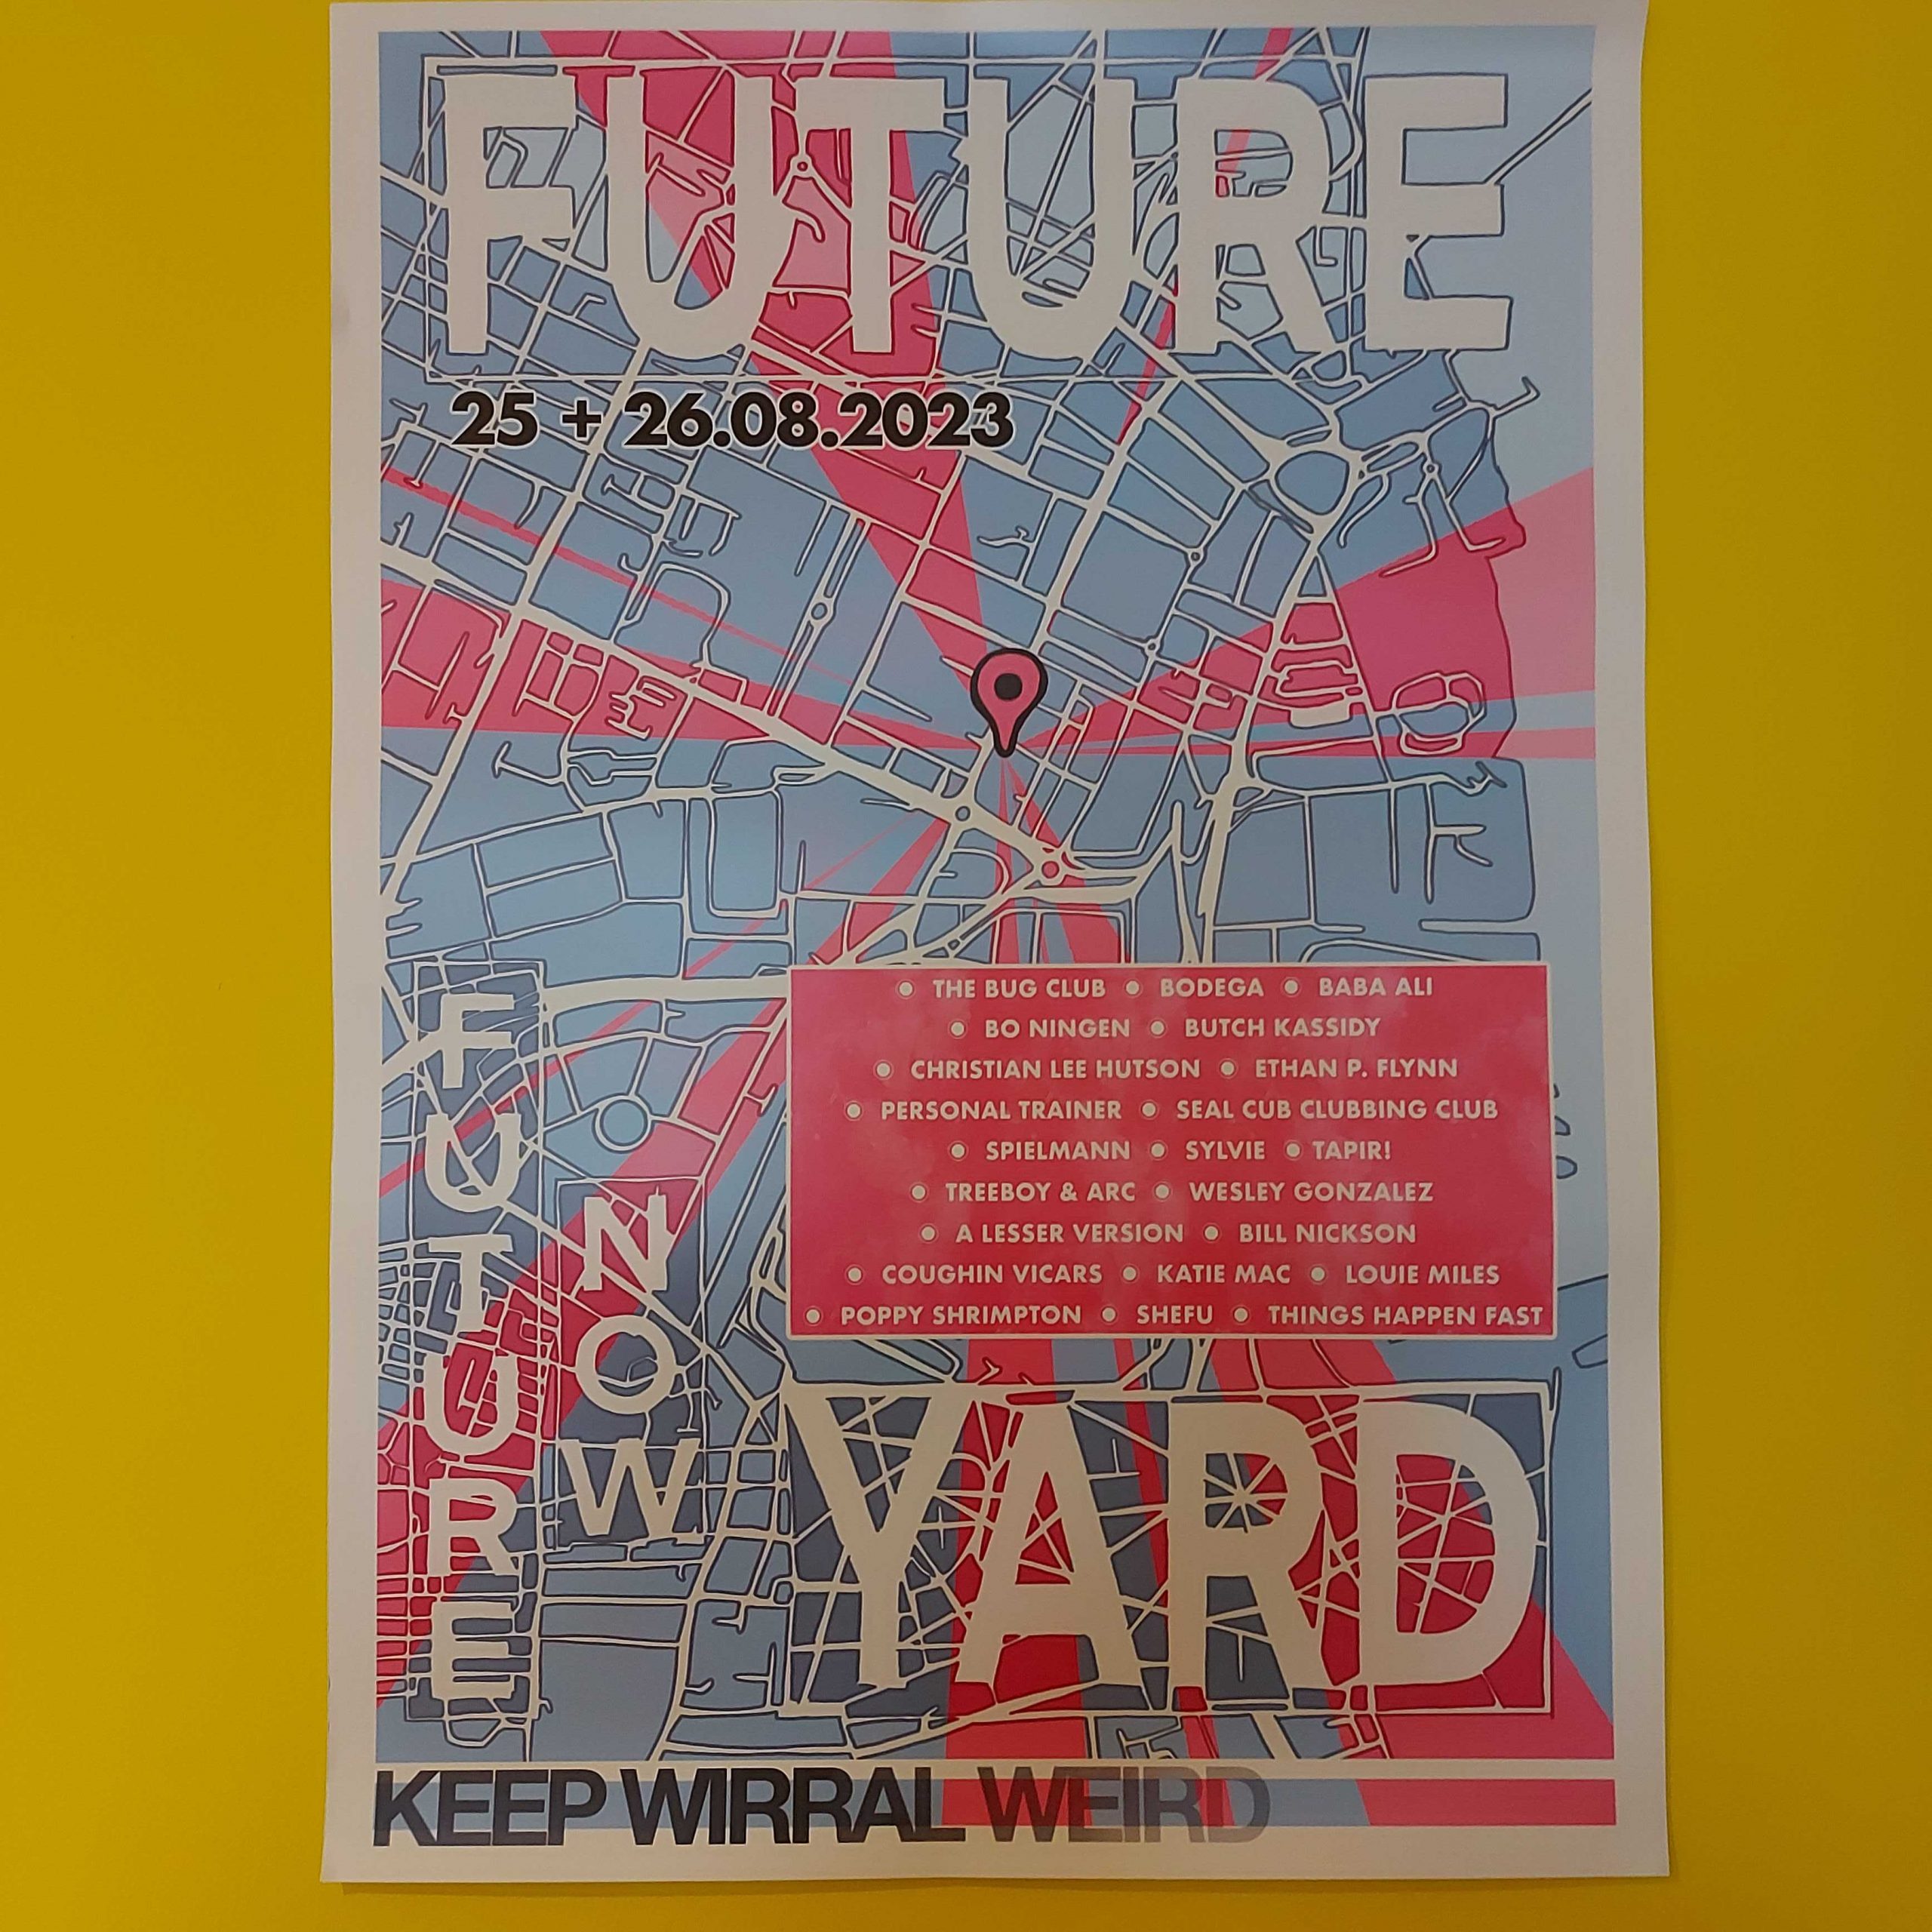 FUTURE NOW A2 ‘KEEP WIRRAL WEIRD’ POSTER